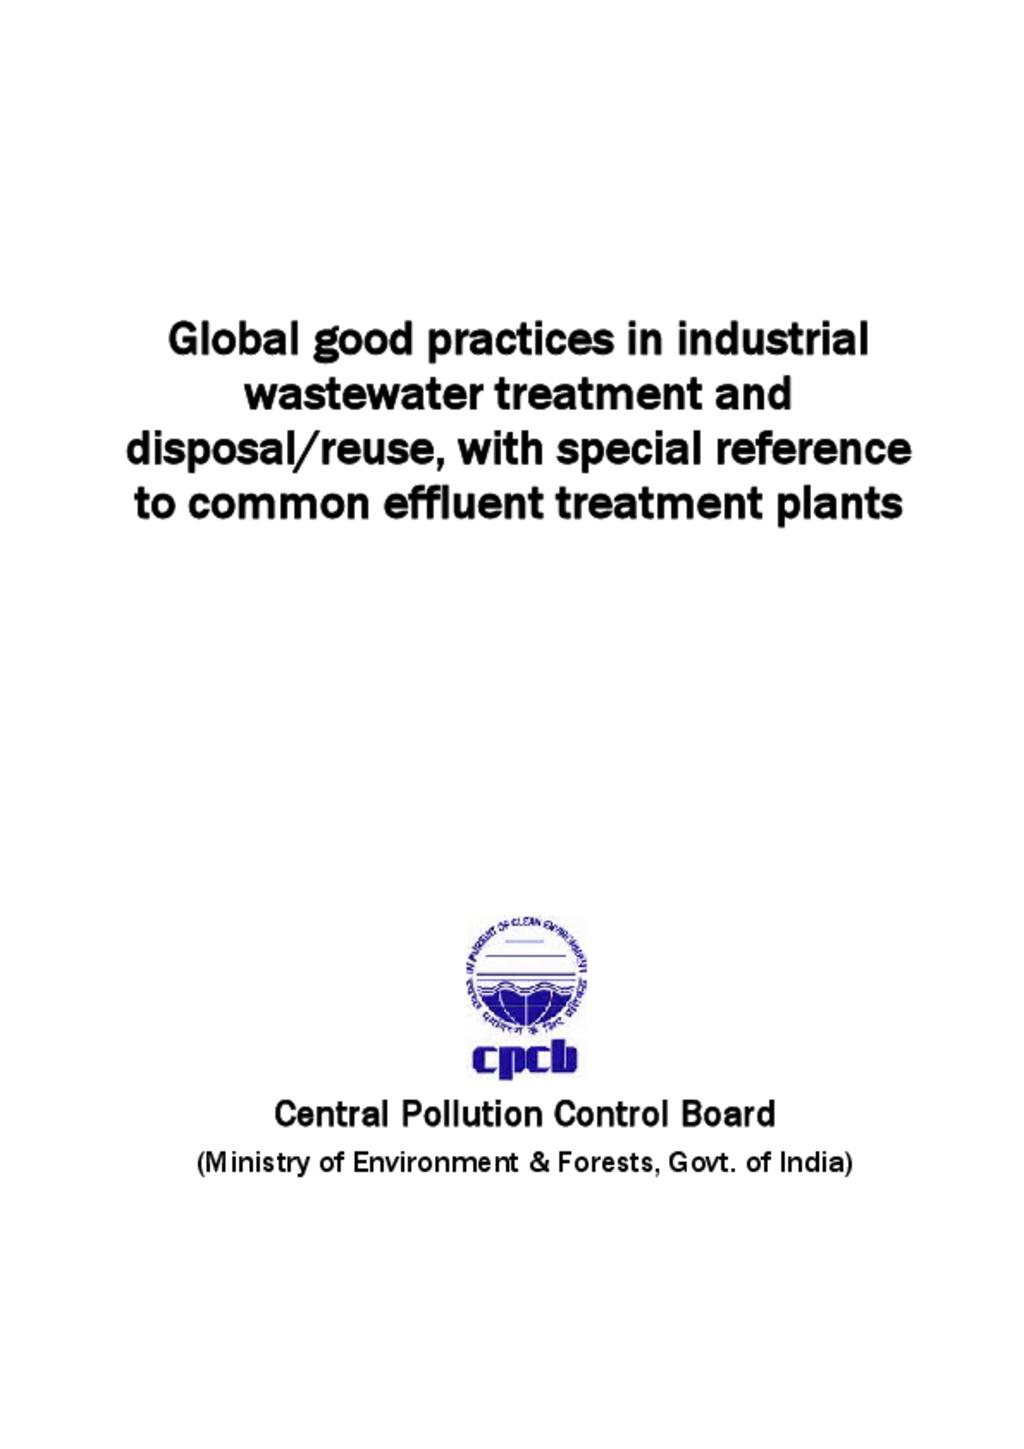 Global Practice on Waste Water Treatment